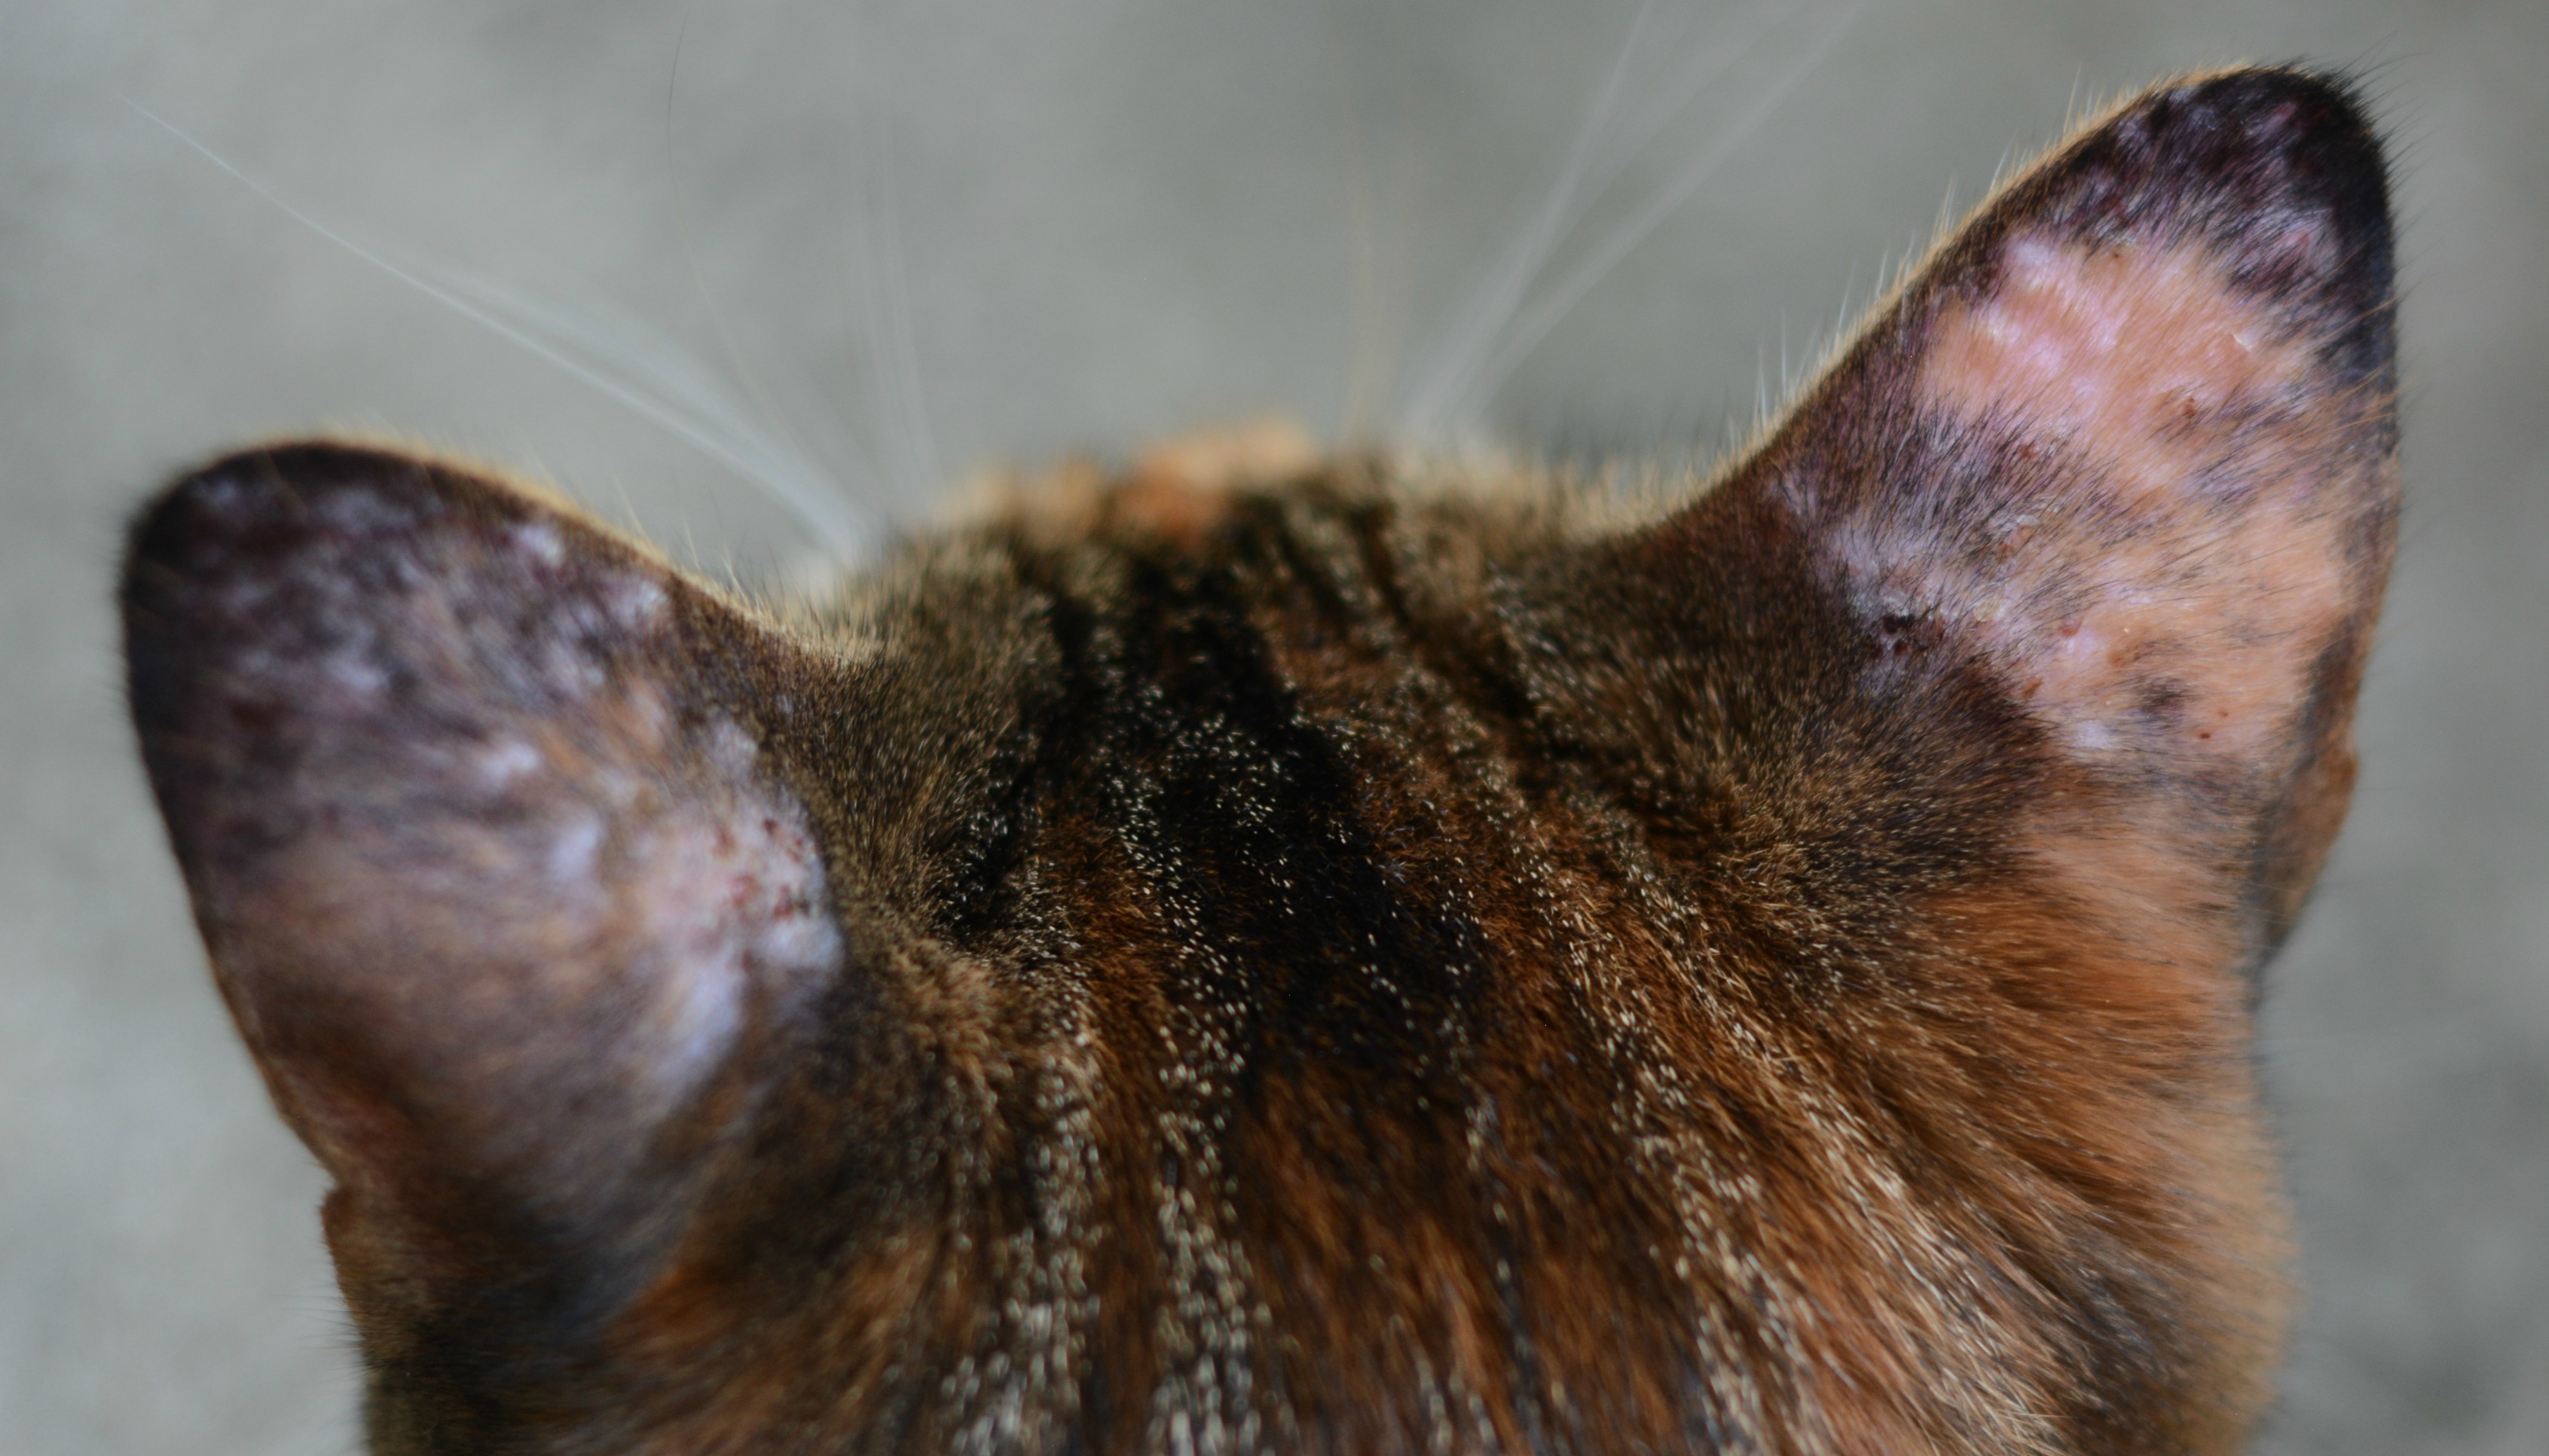 Bumps On My Cats Ears toxoplasmosis